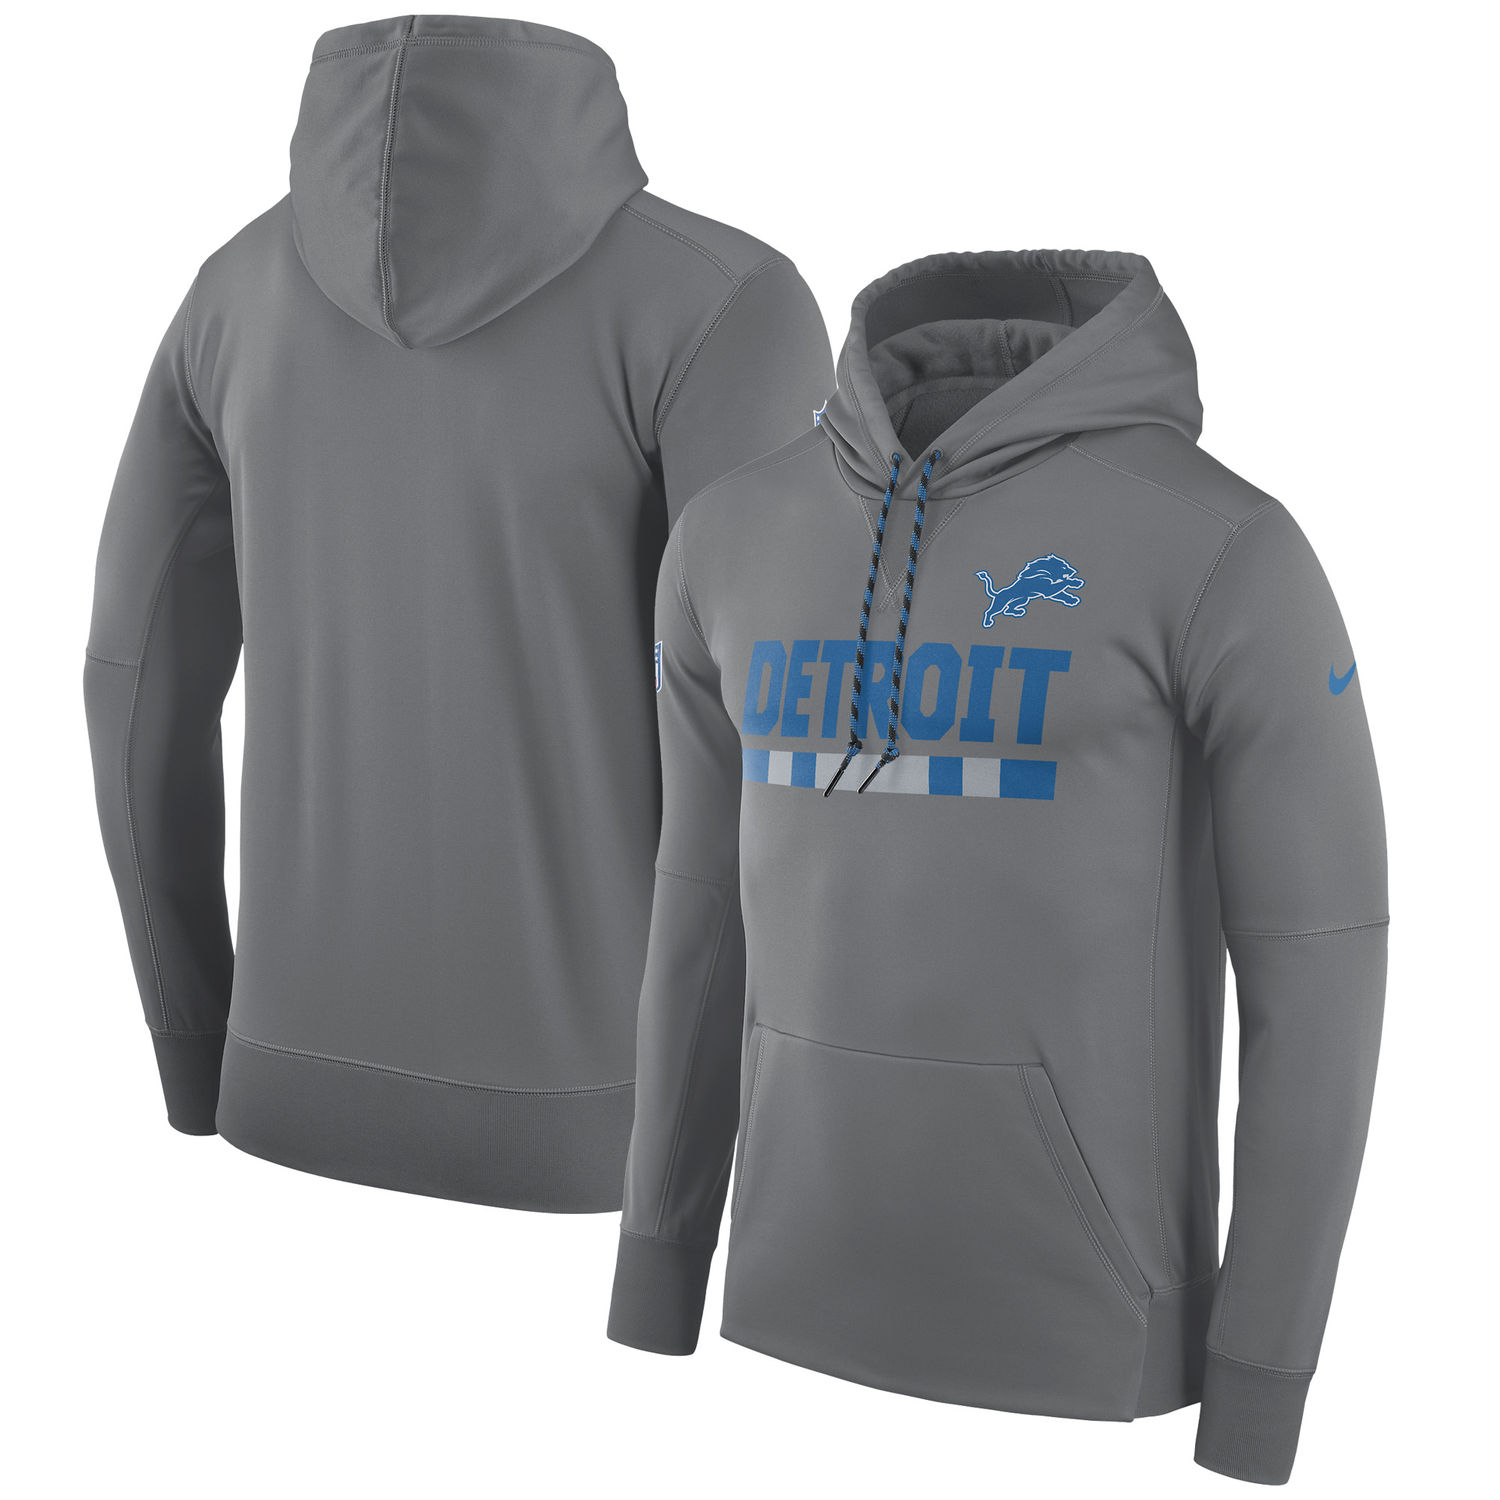 Men's Detroit Lions Nike Heathered Gray Sideline Team Name Performance Pullover Hoodie